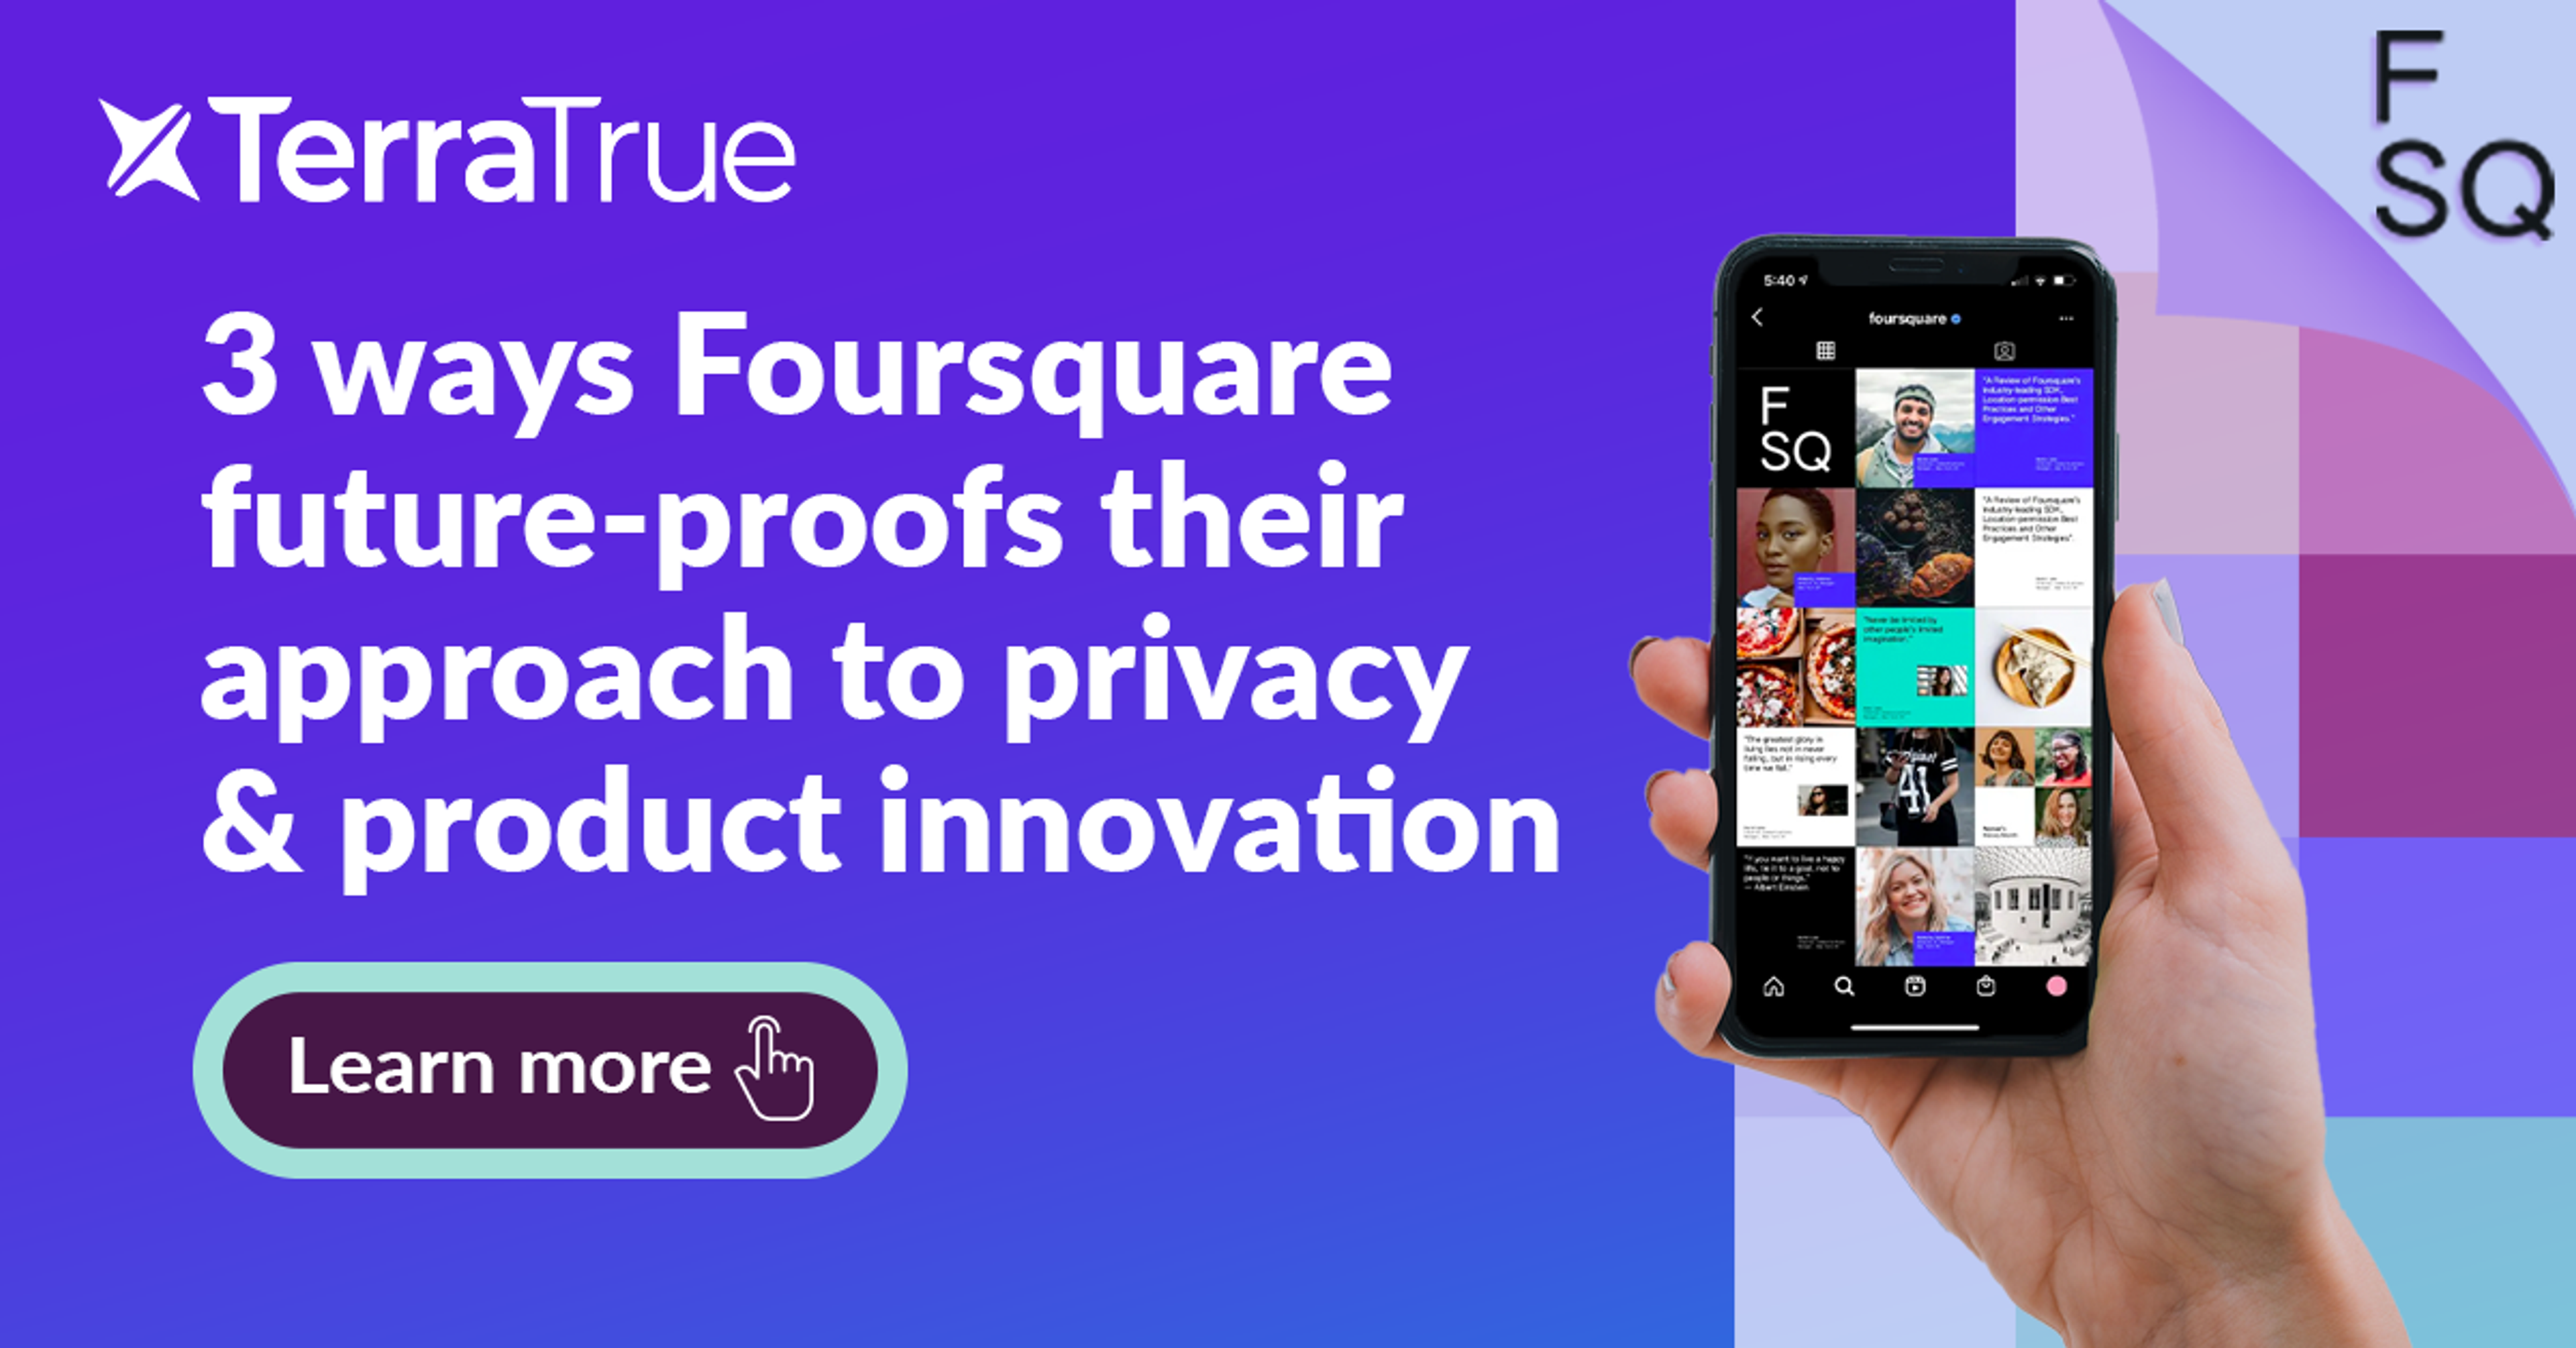 3 ways Foursquare future-proofs their approach to privacy & product innovation